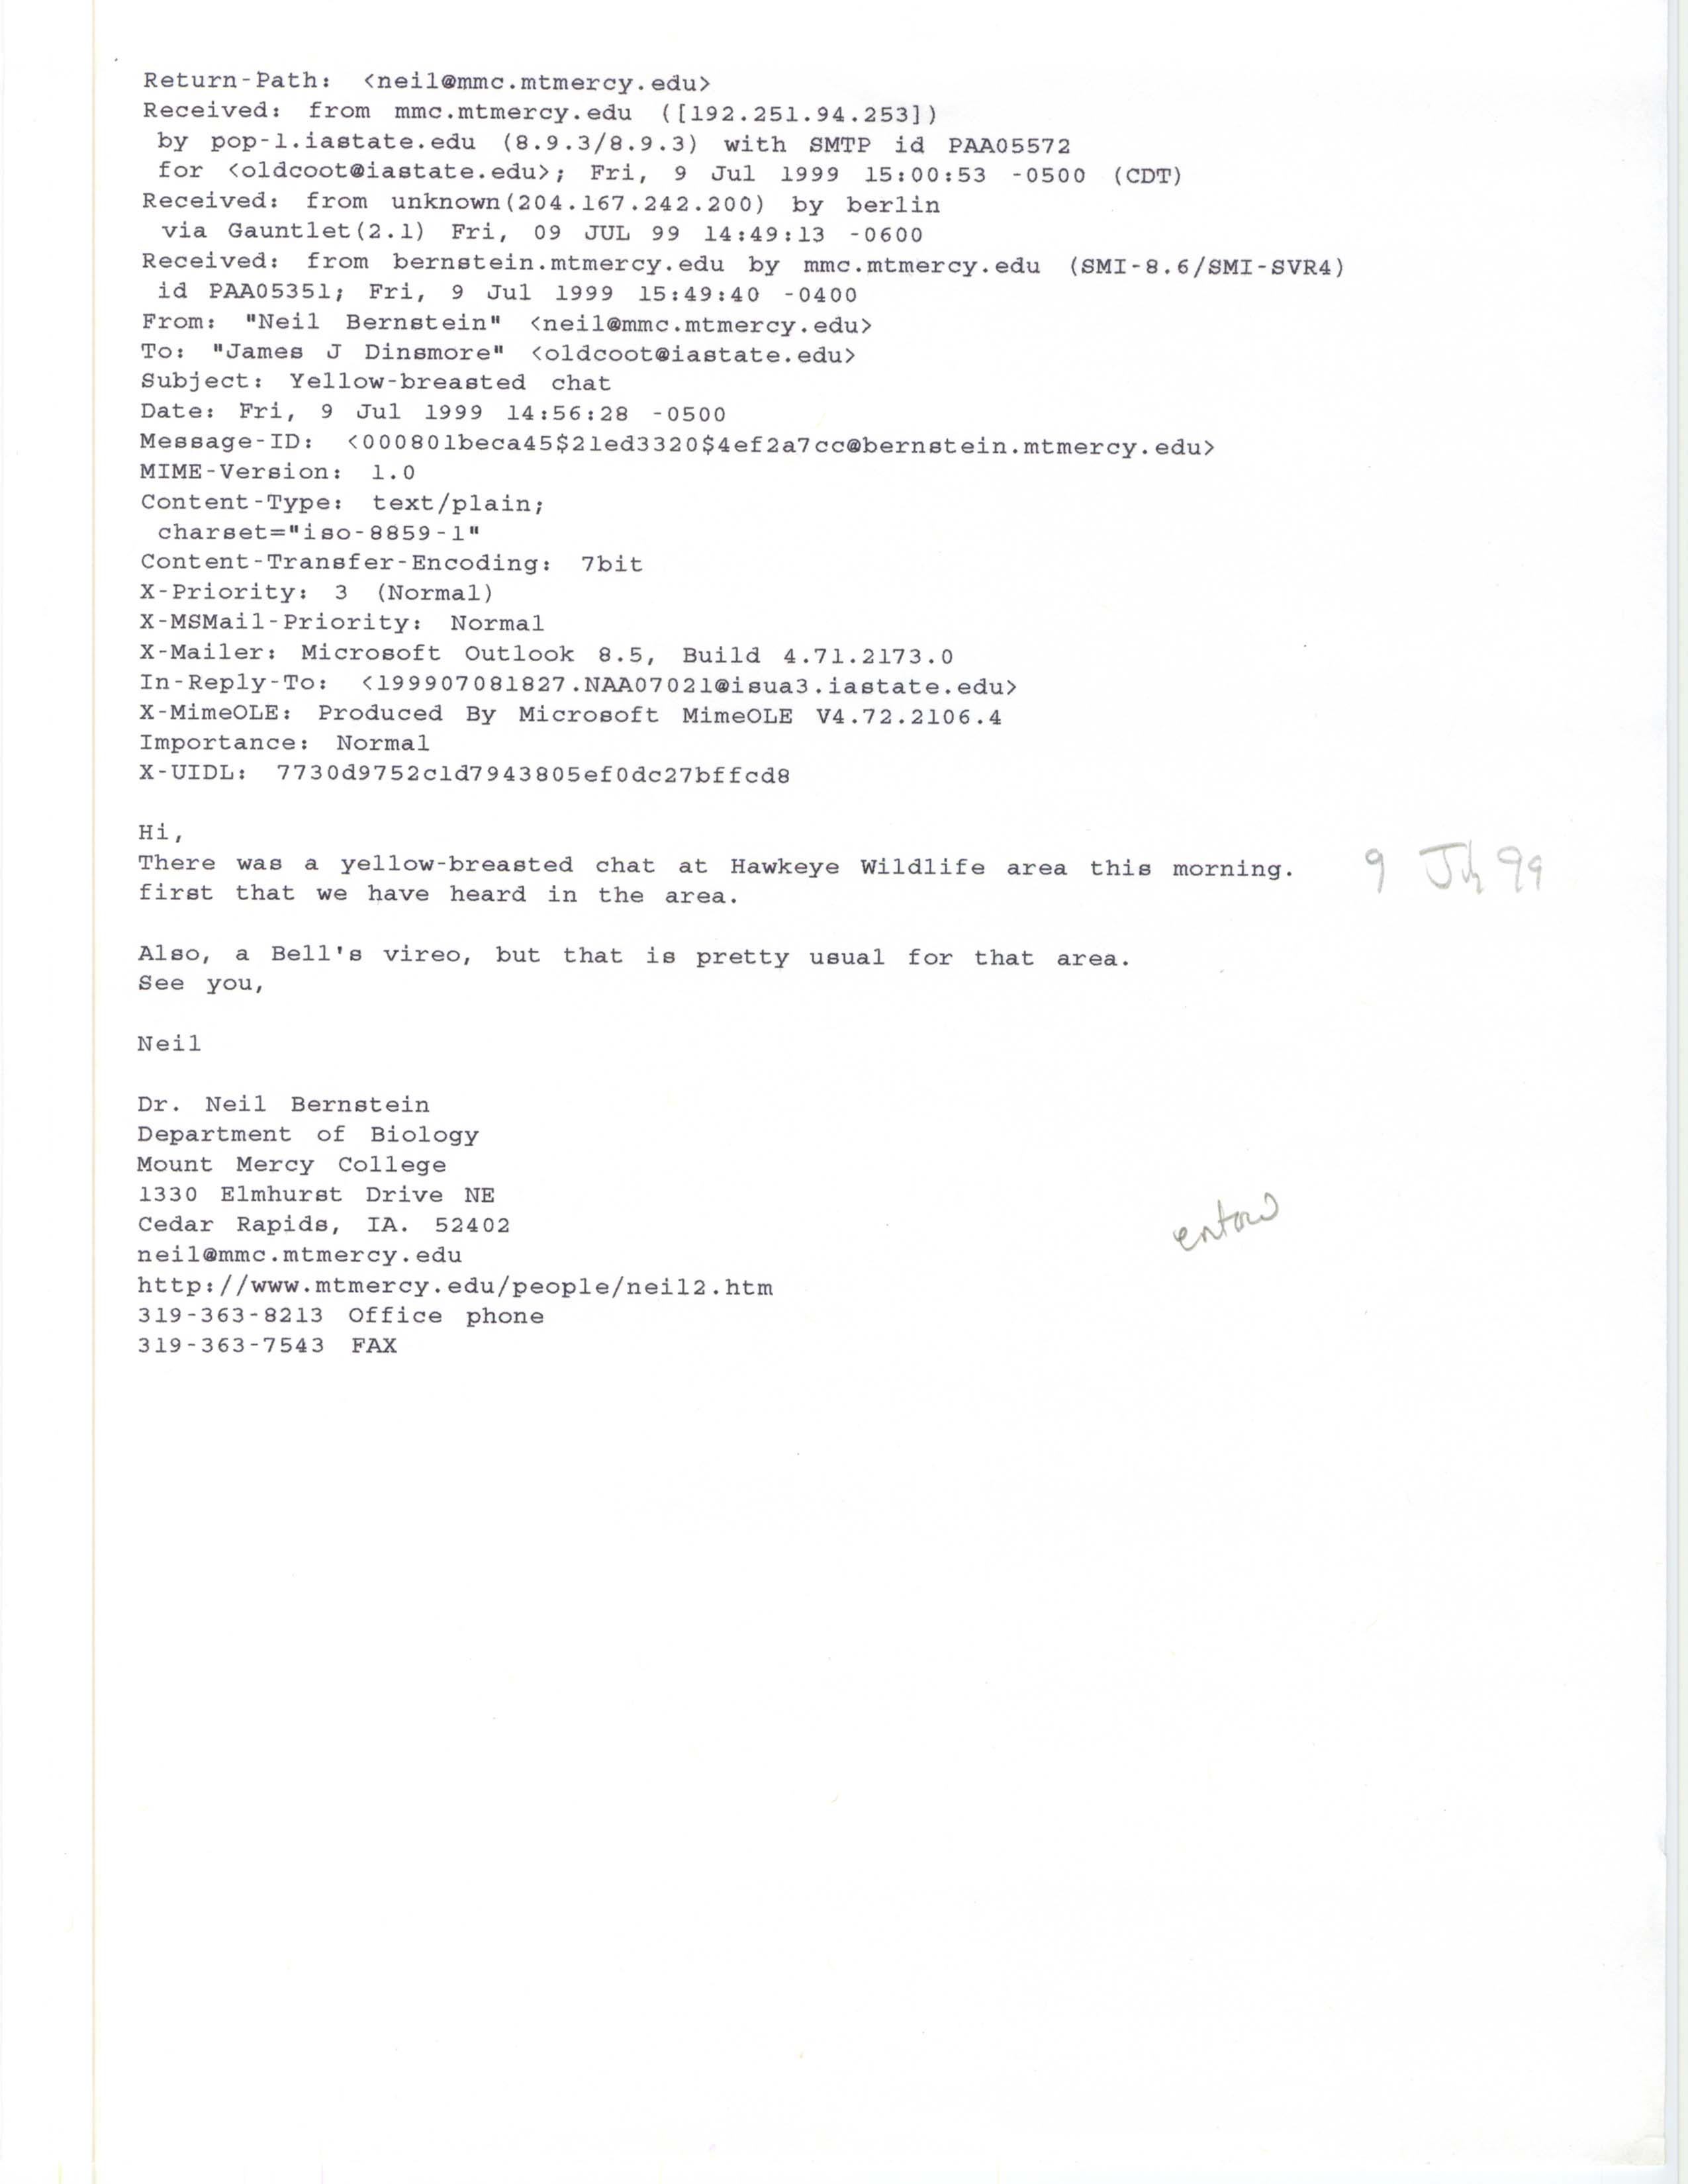 Neil Bernstein email to Jim Dinsmore regarding Yellow-breasted Chat, July 9, 1999